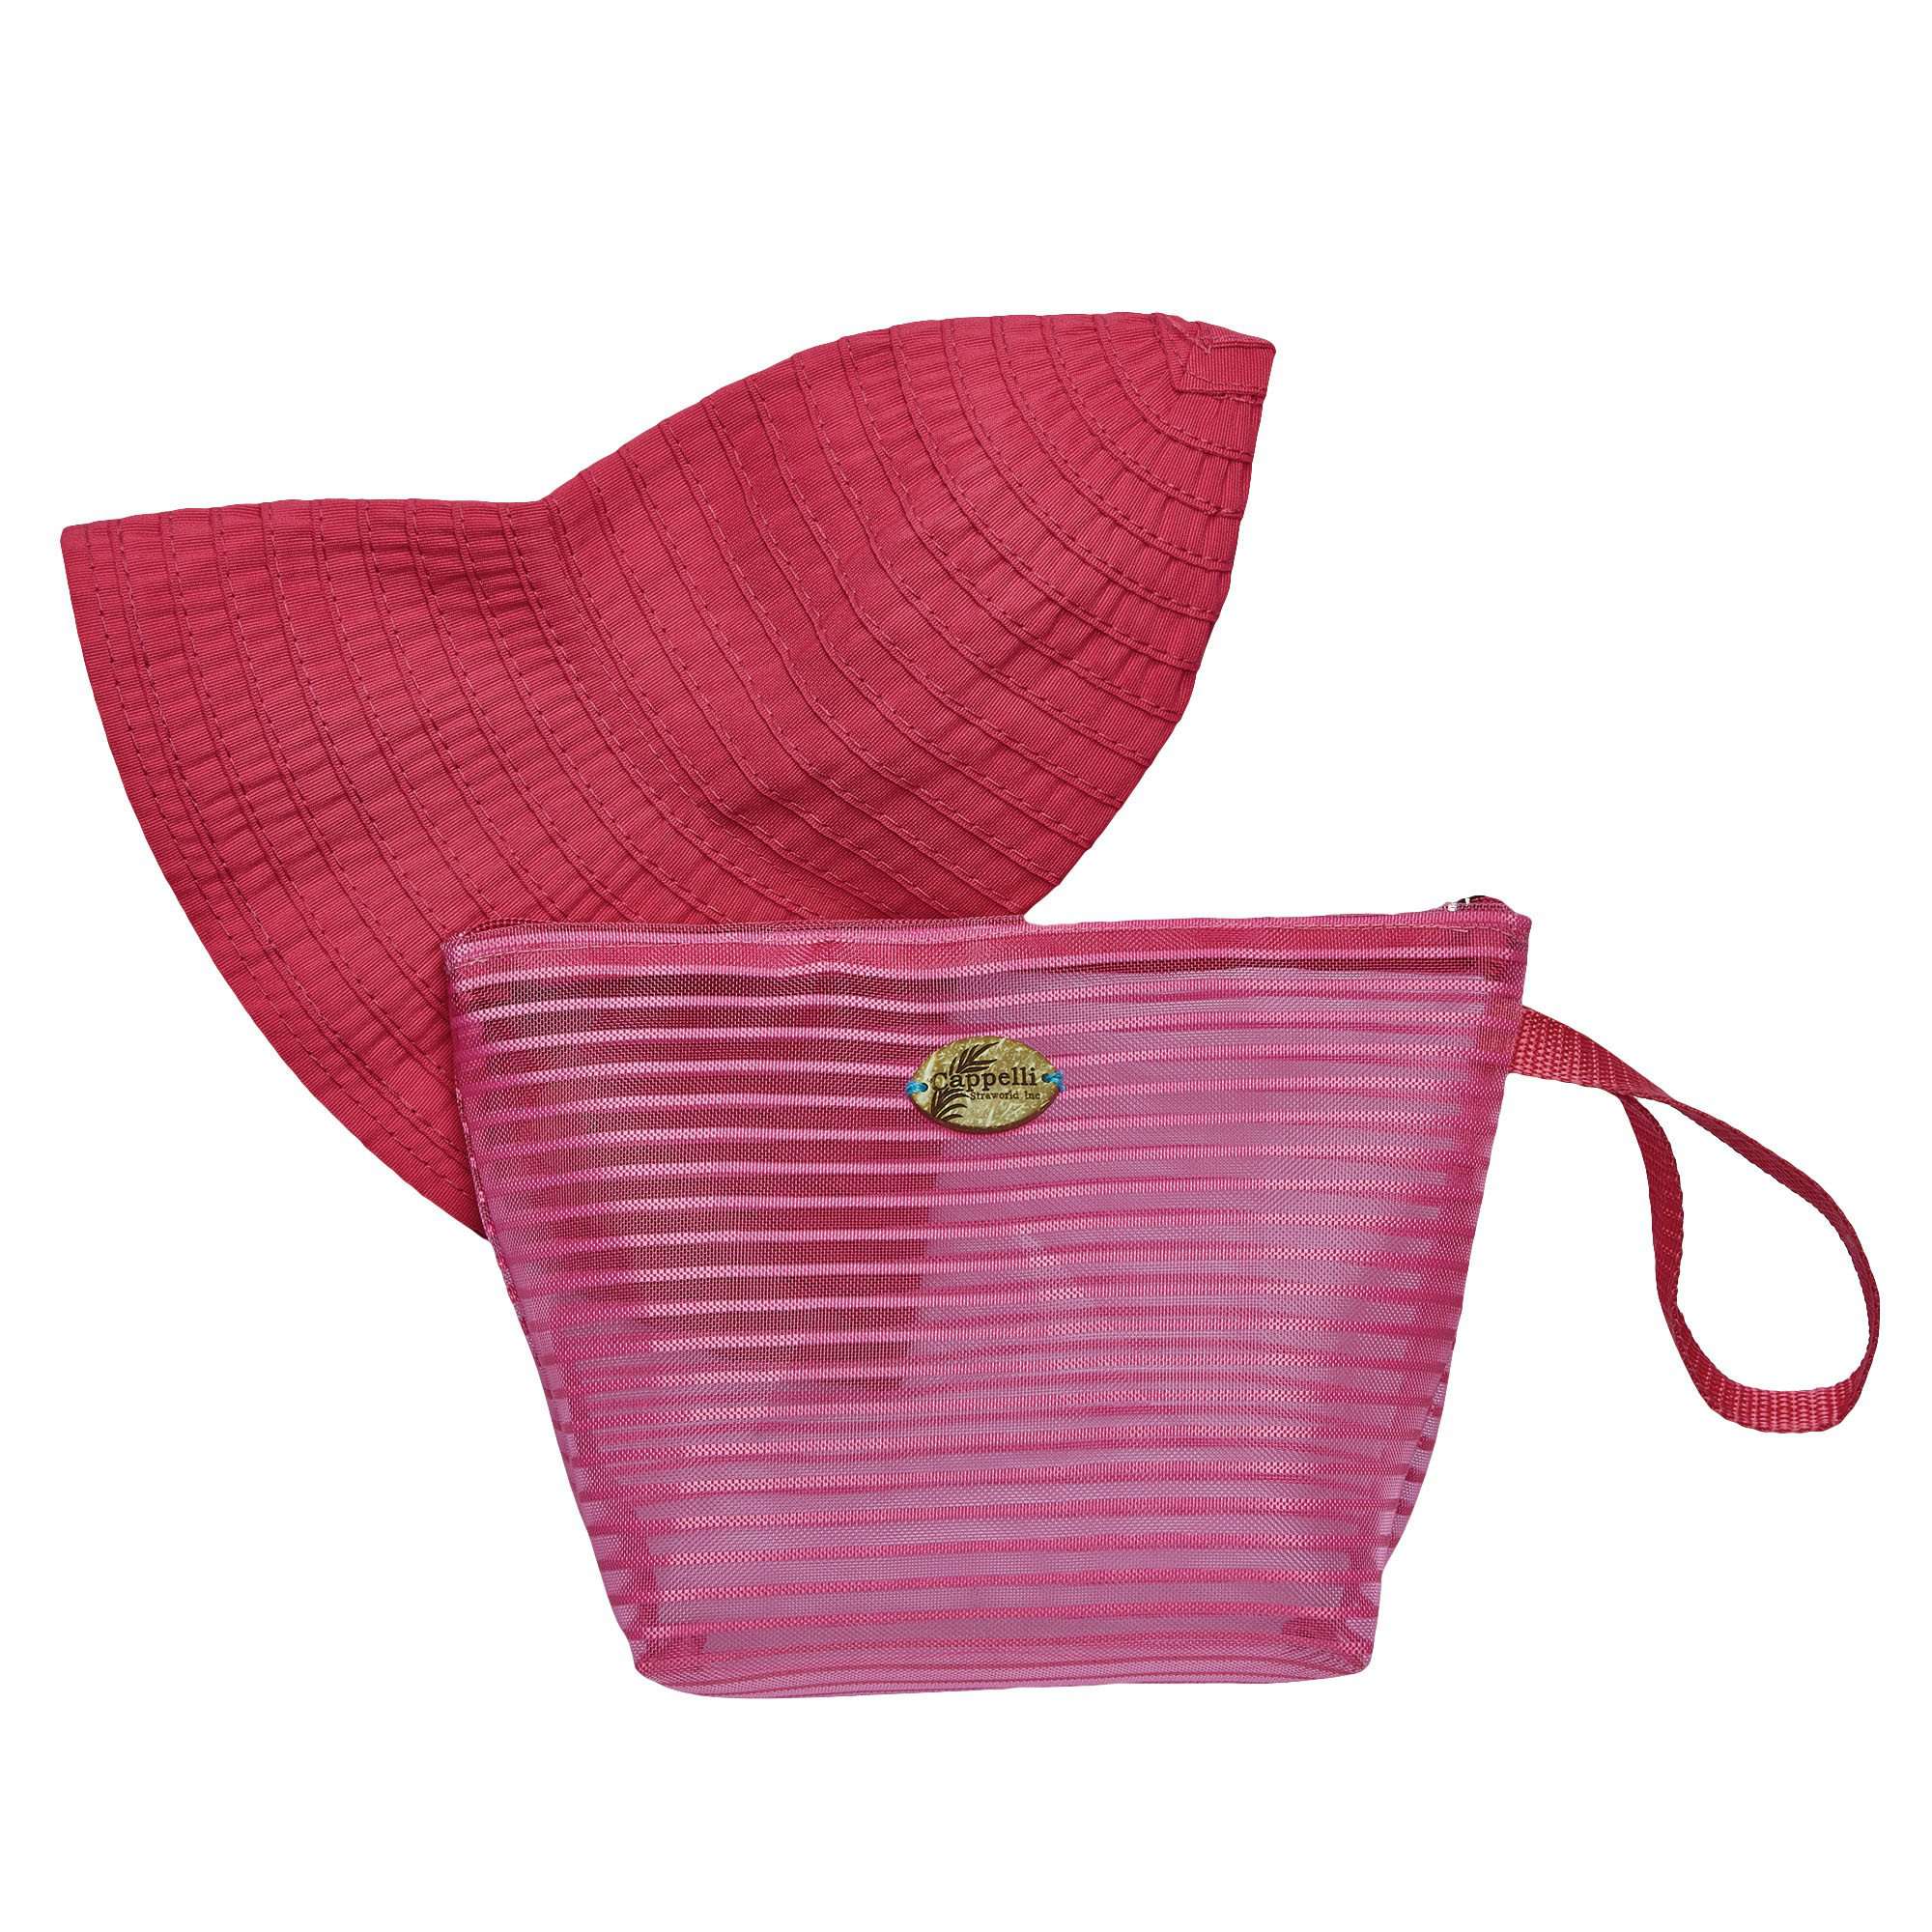 Cappelli's Packable Hat and Bag Set Wide Brim Hat Cappelli Straworld WSbag937FC Fuchsia  